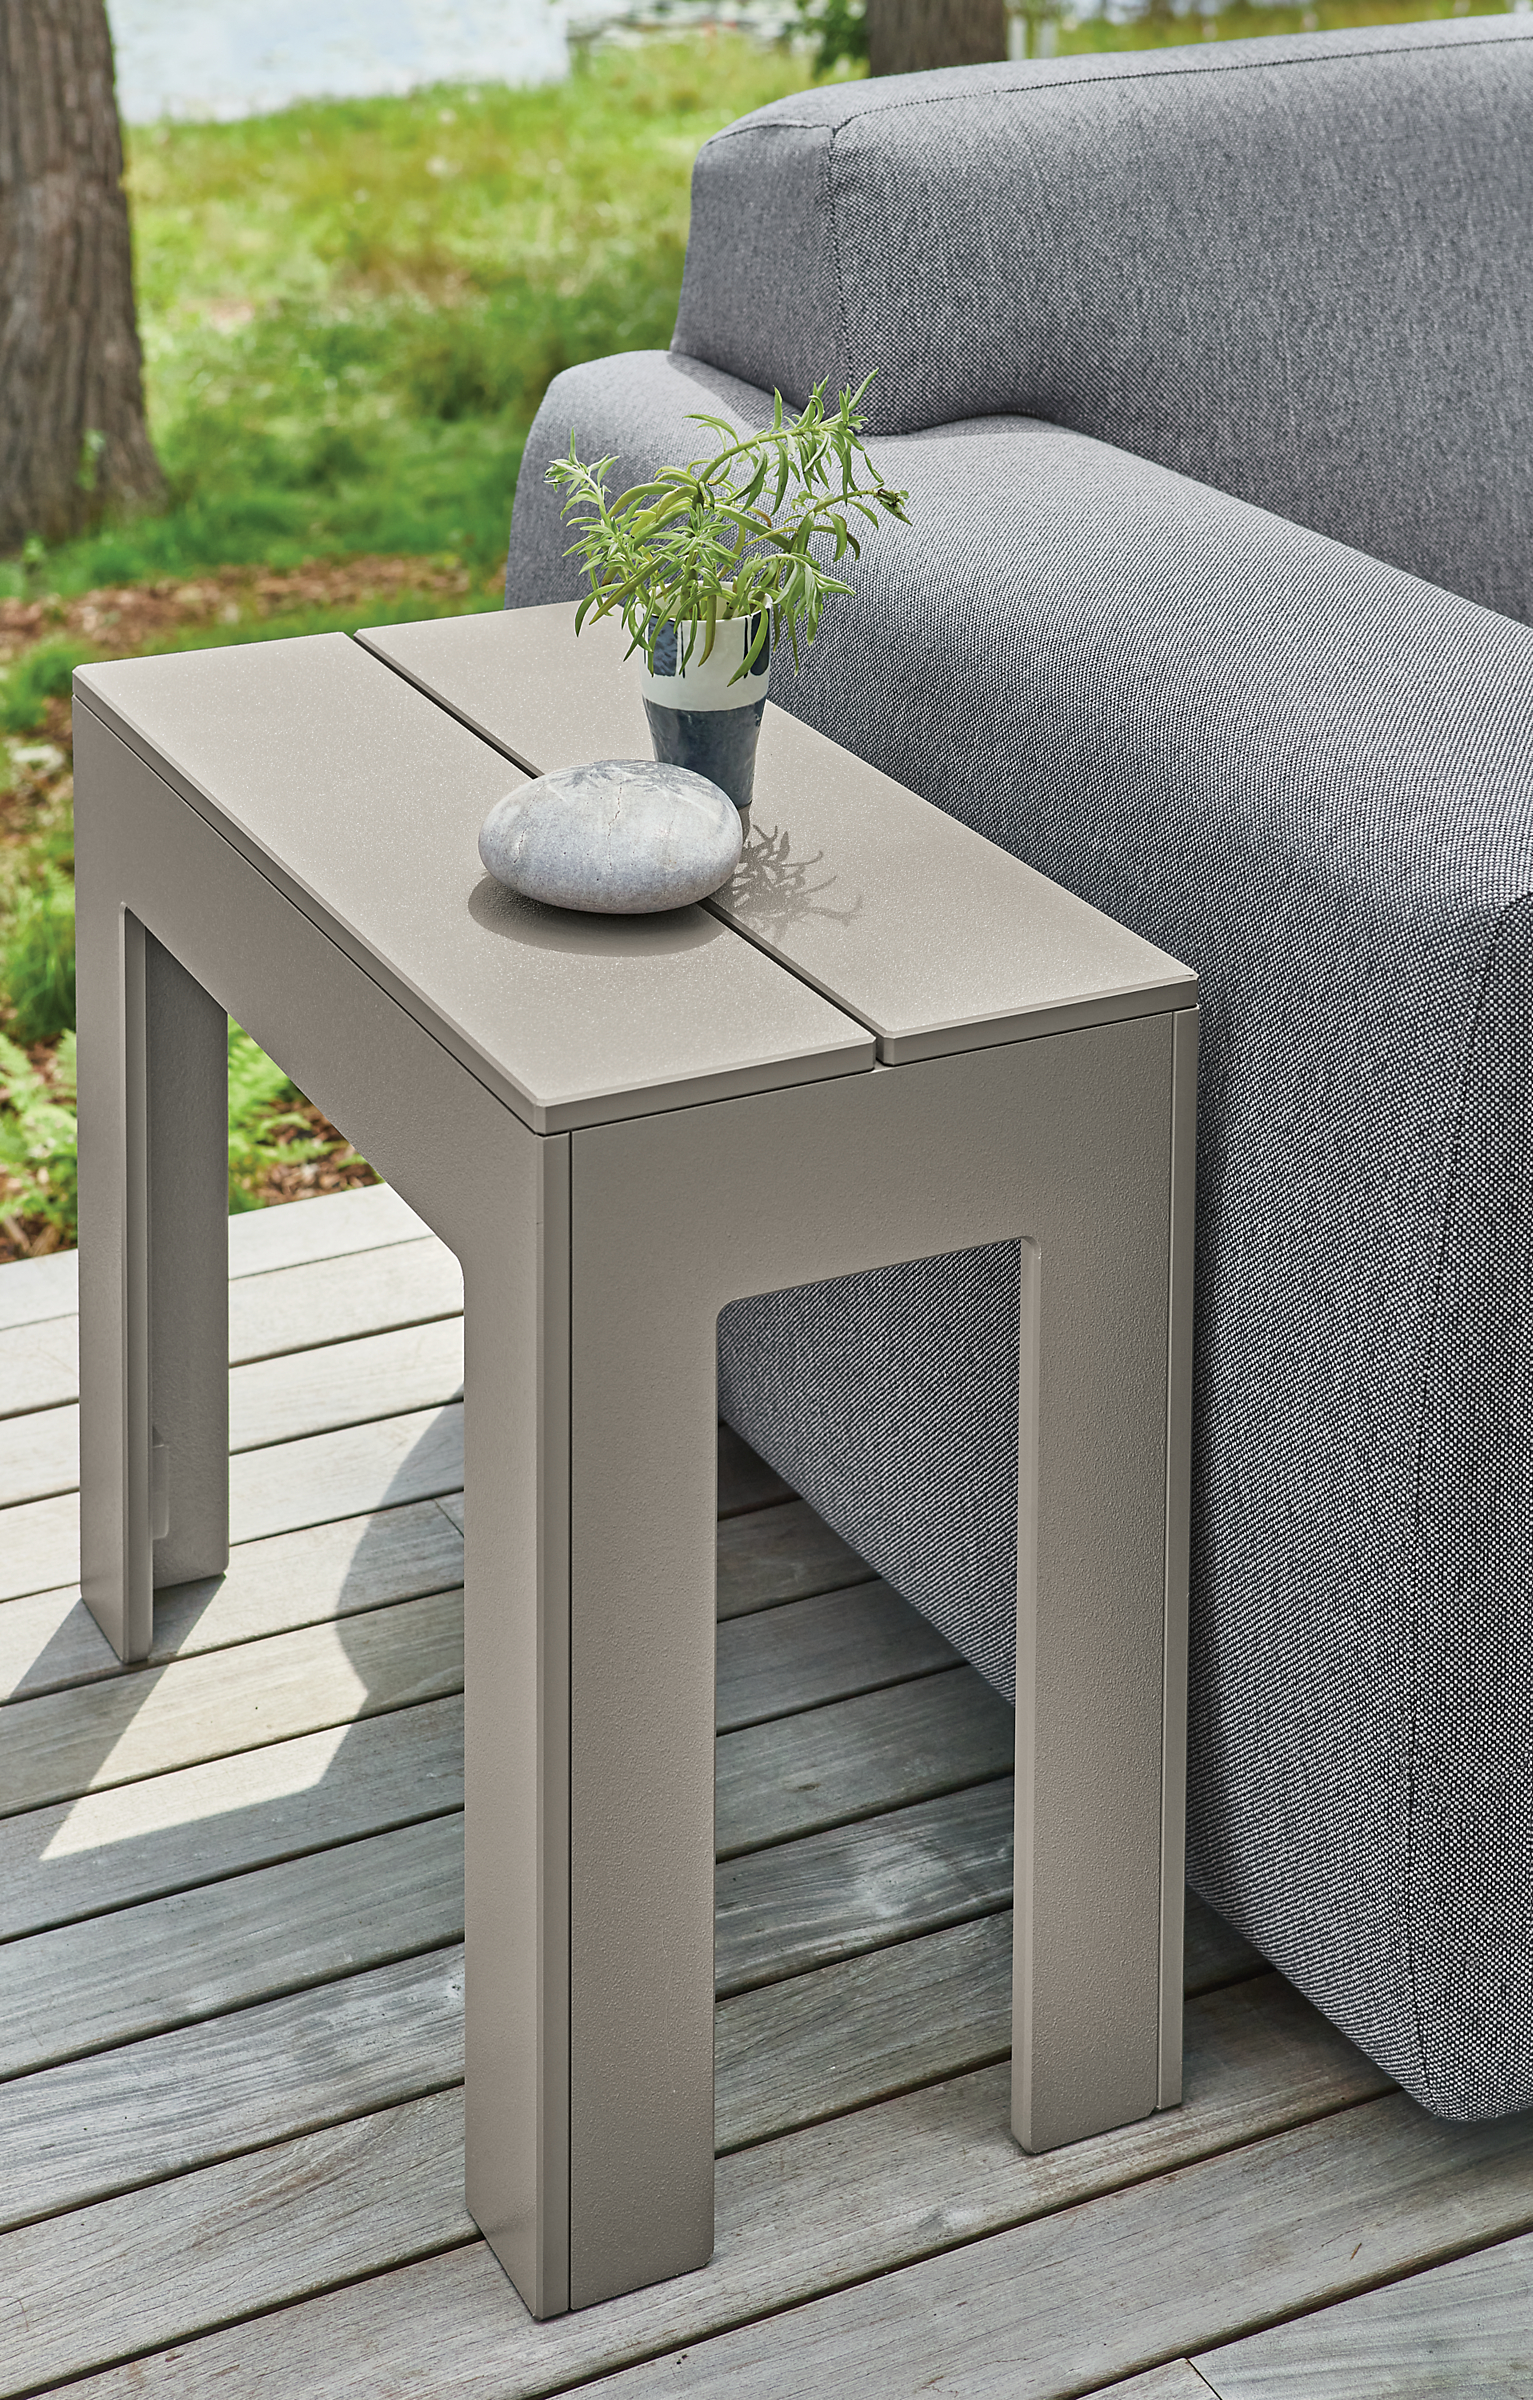 Detail of Henry side table in Putty beside Drift outdoor sofa.